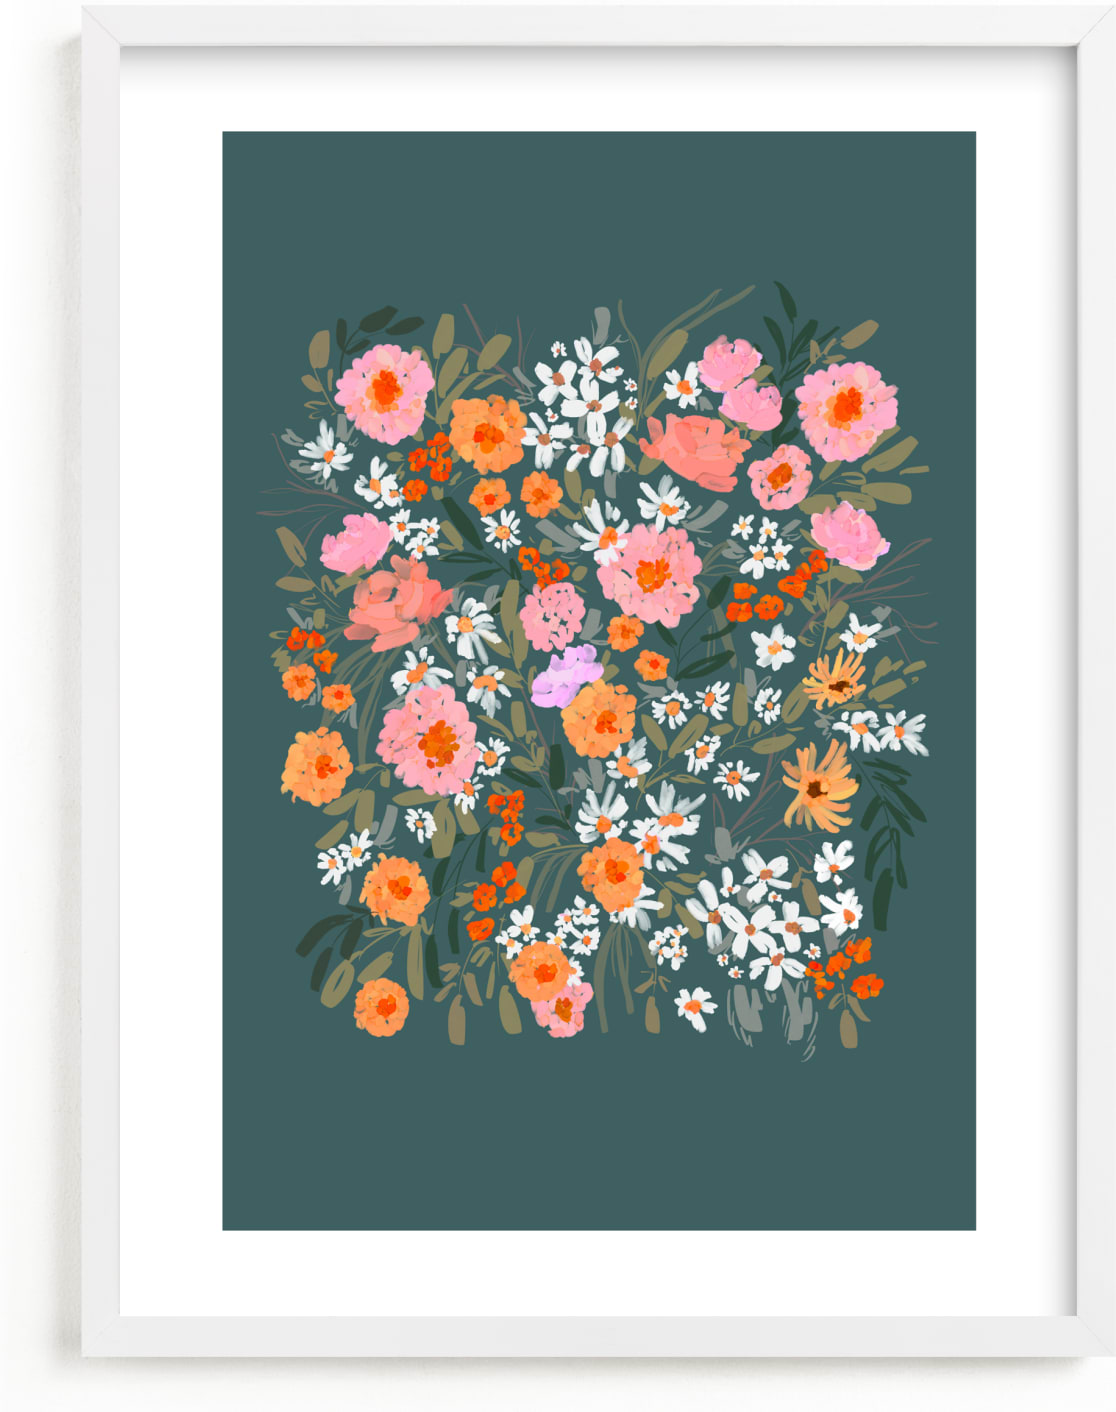 This is a pink kids wall art by Britt Mills called Picking Wildflowers.